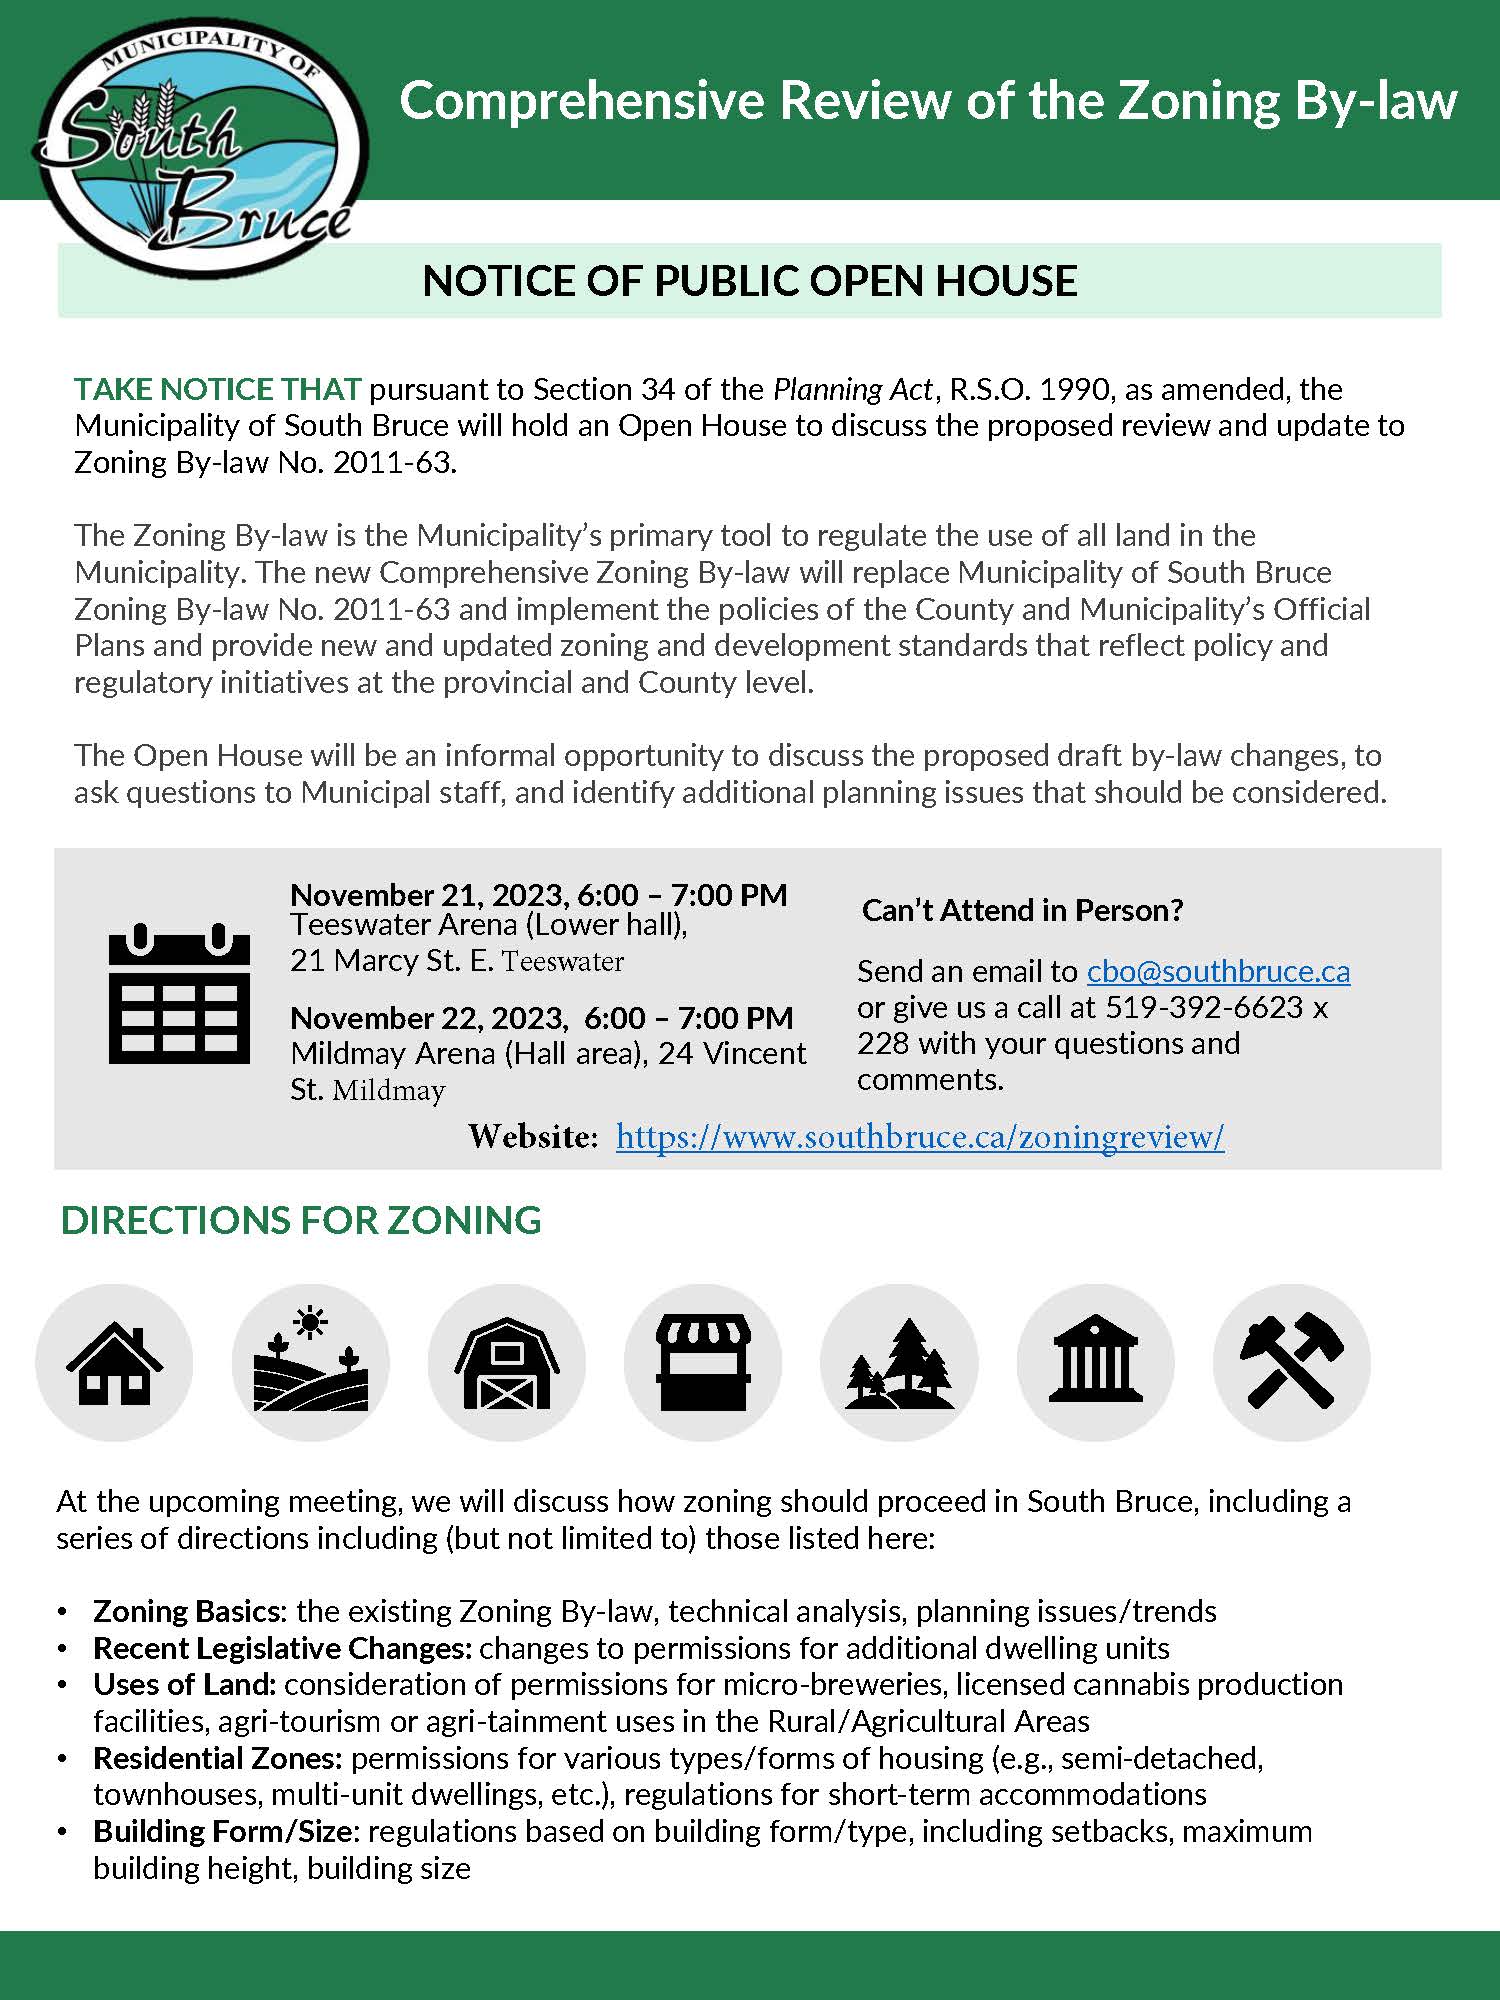 public open house notice flyer for zoning bylaw